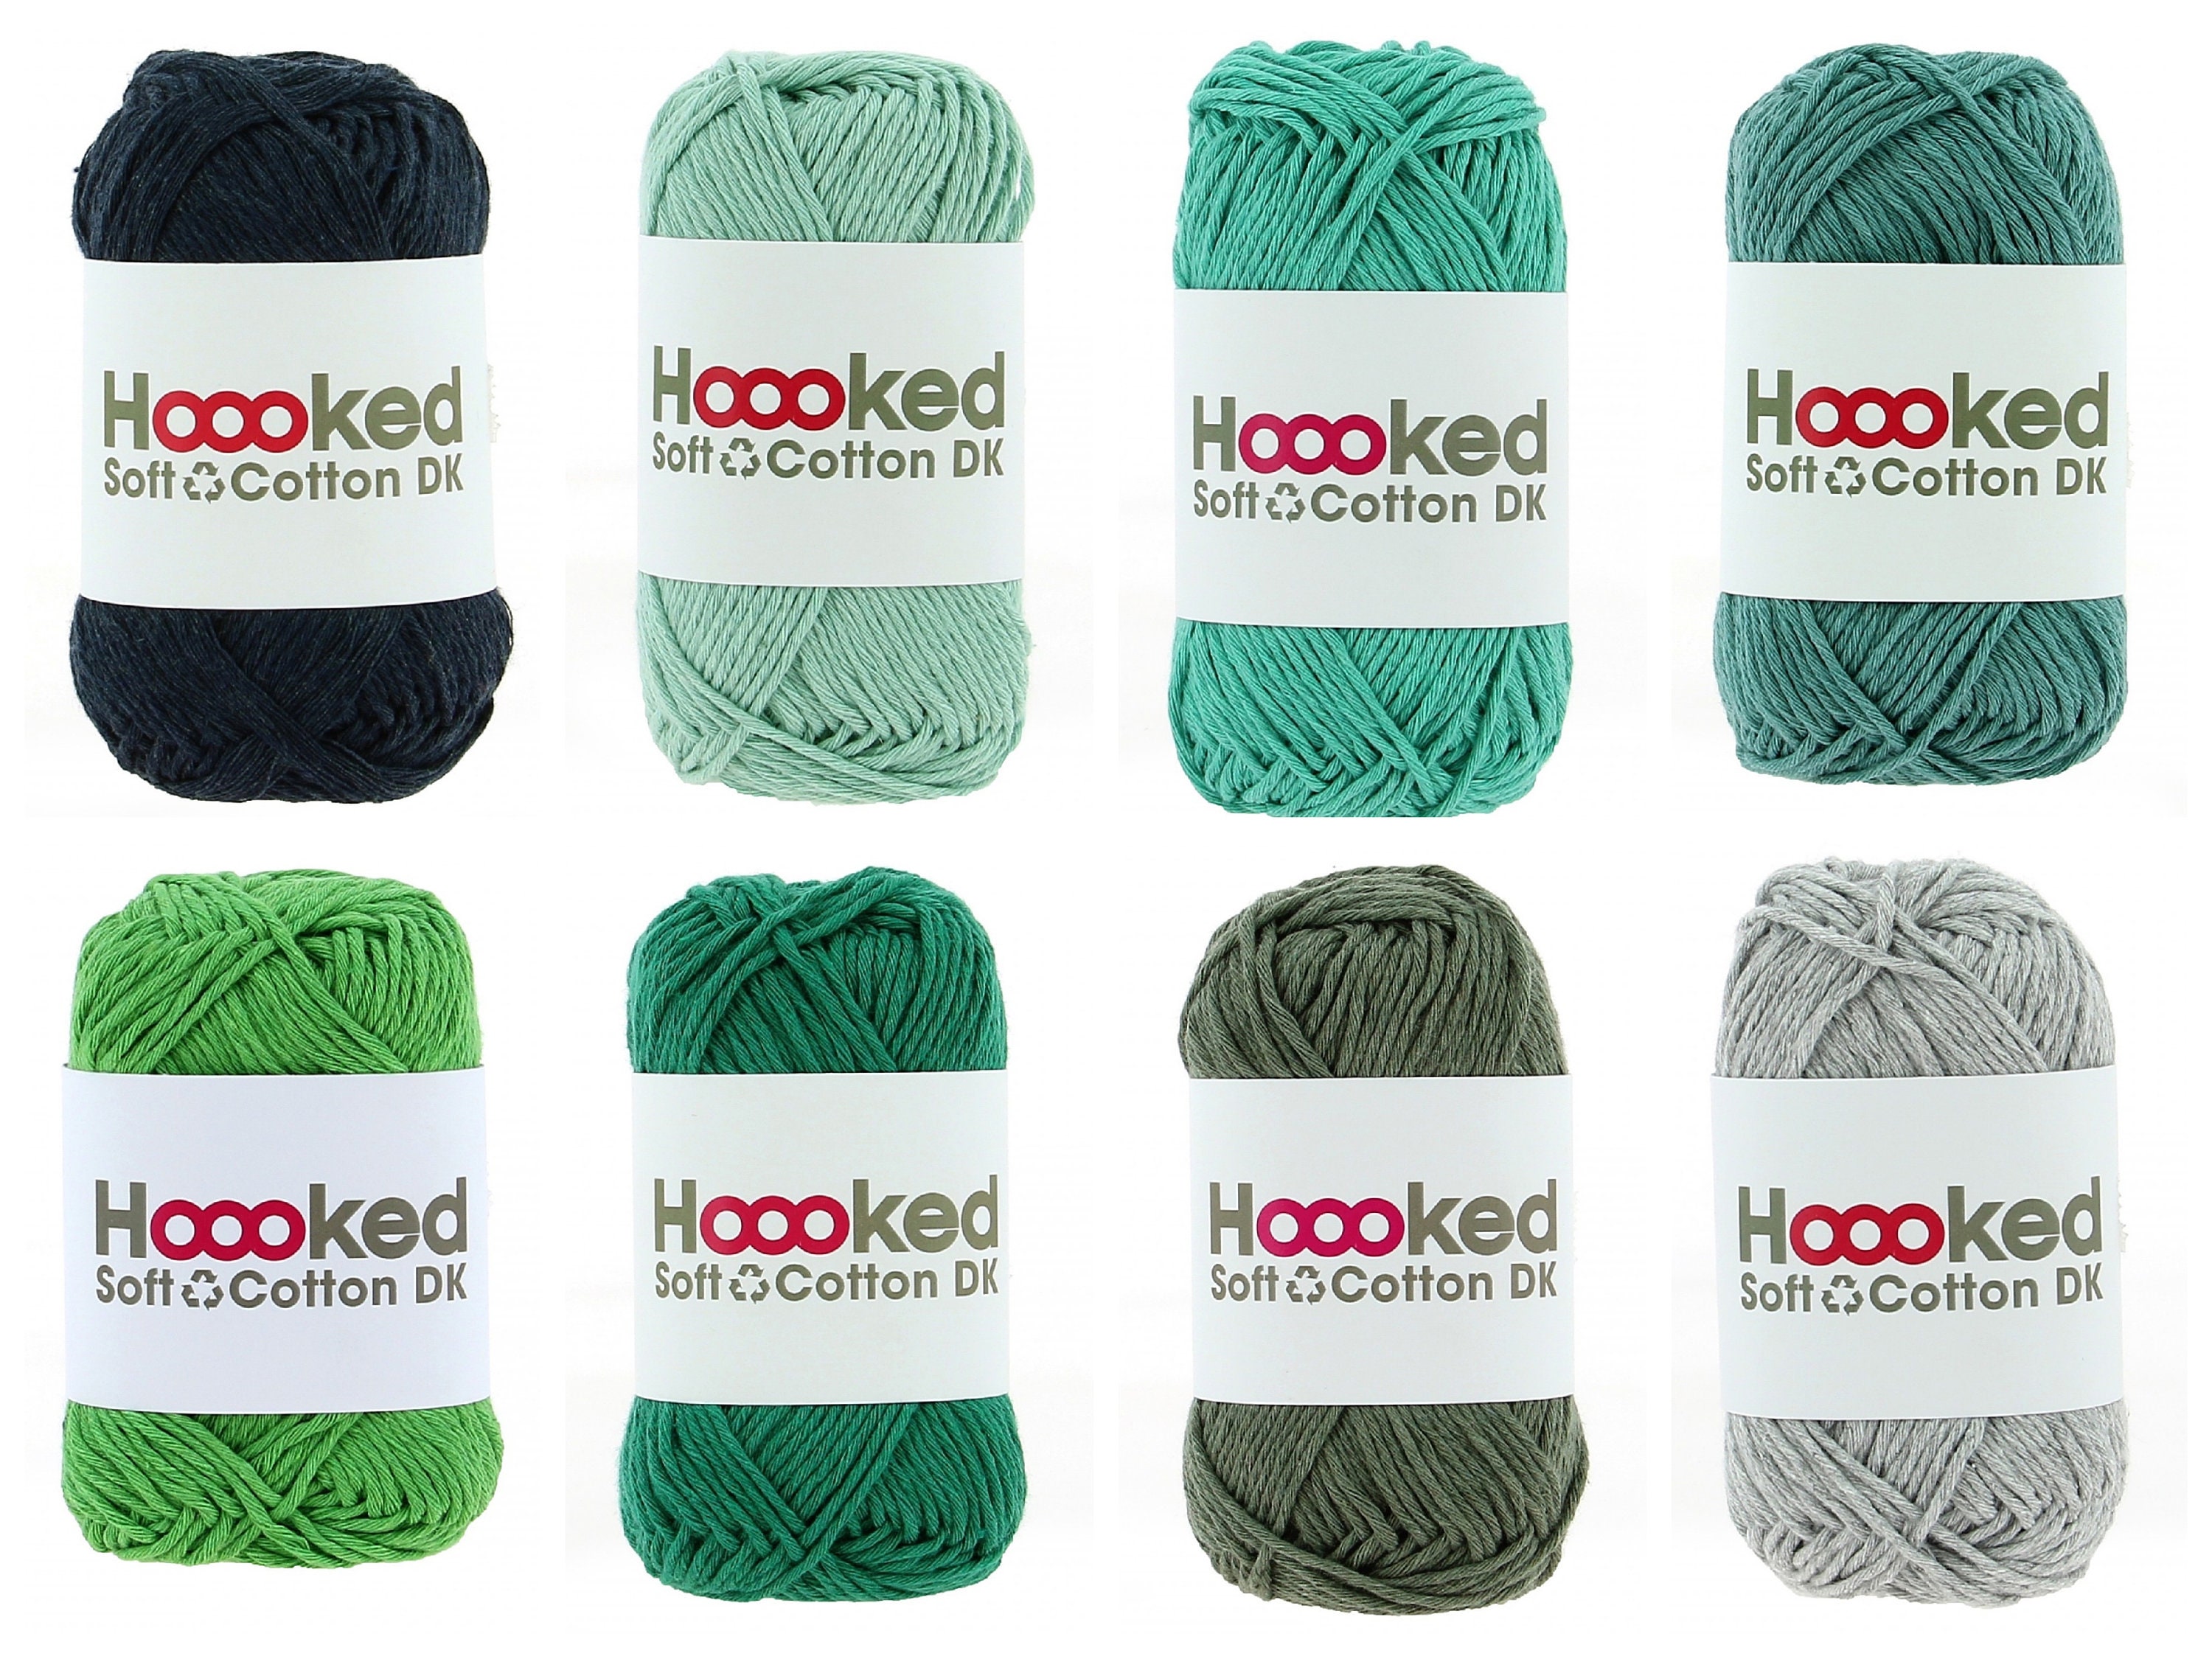 Hoooked Recycled DK Cotton is a sustainable and budget-friendly recycled cotton  yarn.